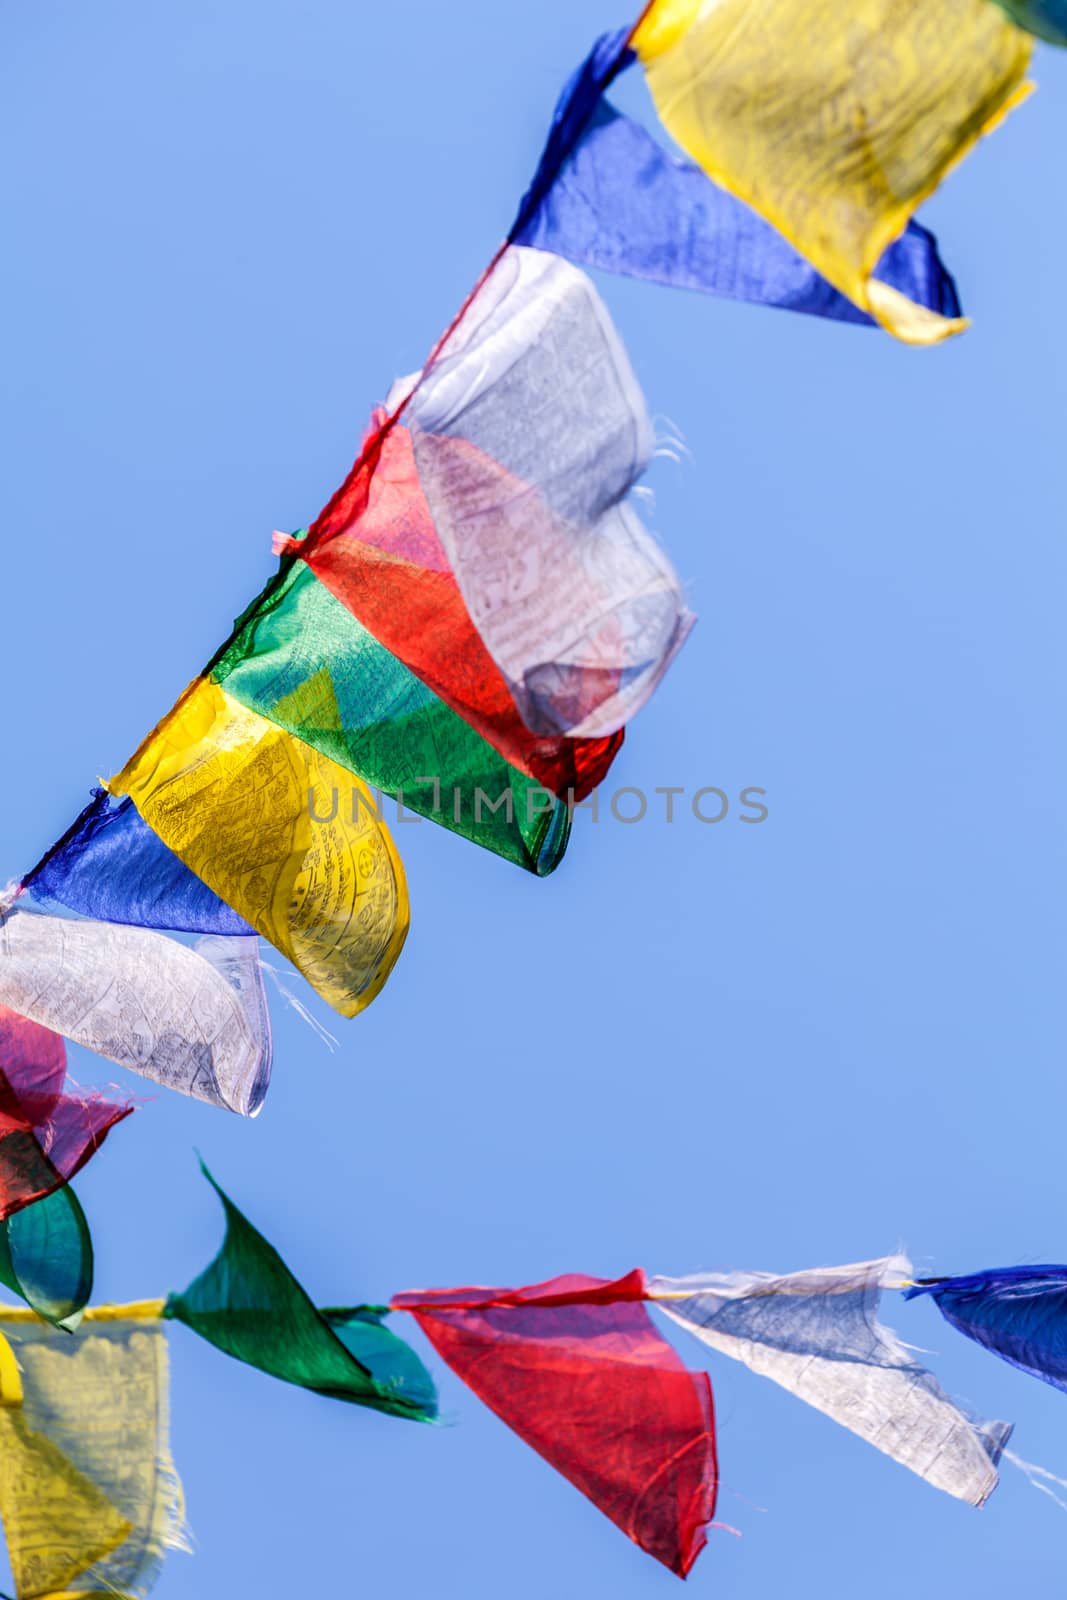 Buddhist prayer flags the holy traditional flag in Bhutan